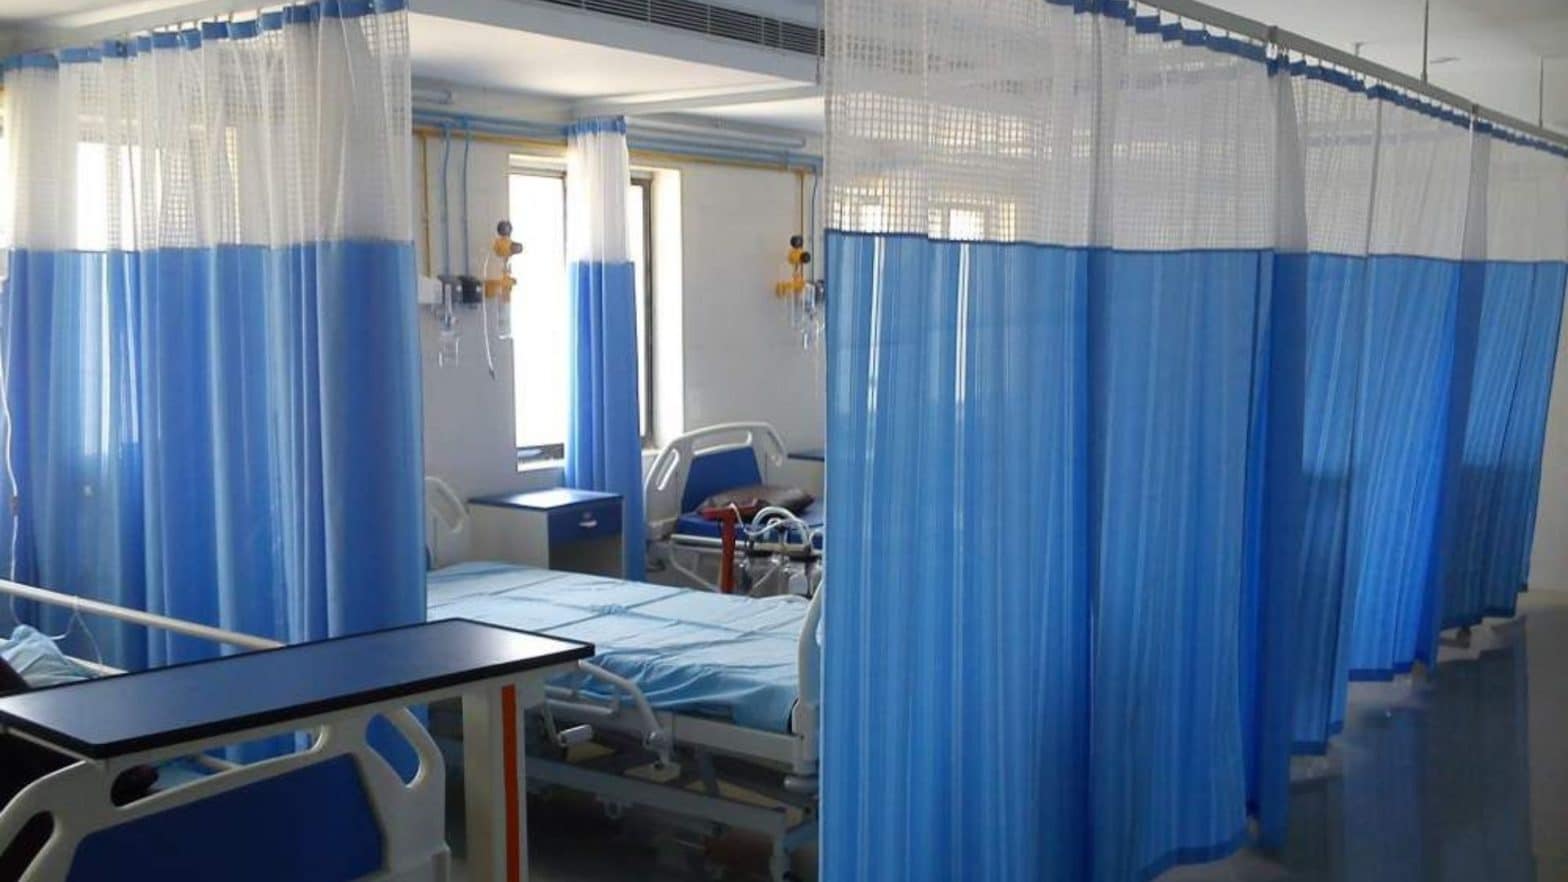 Bеst Practicеs for Hospital Curtains Maintеnancе